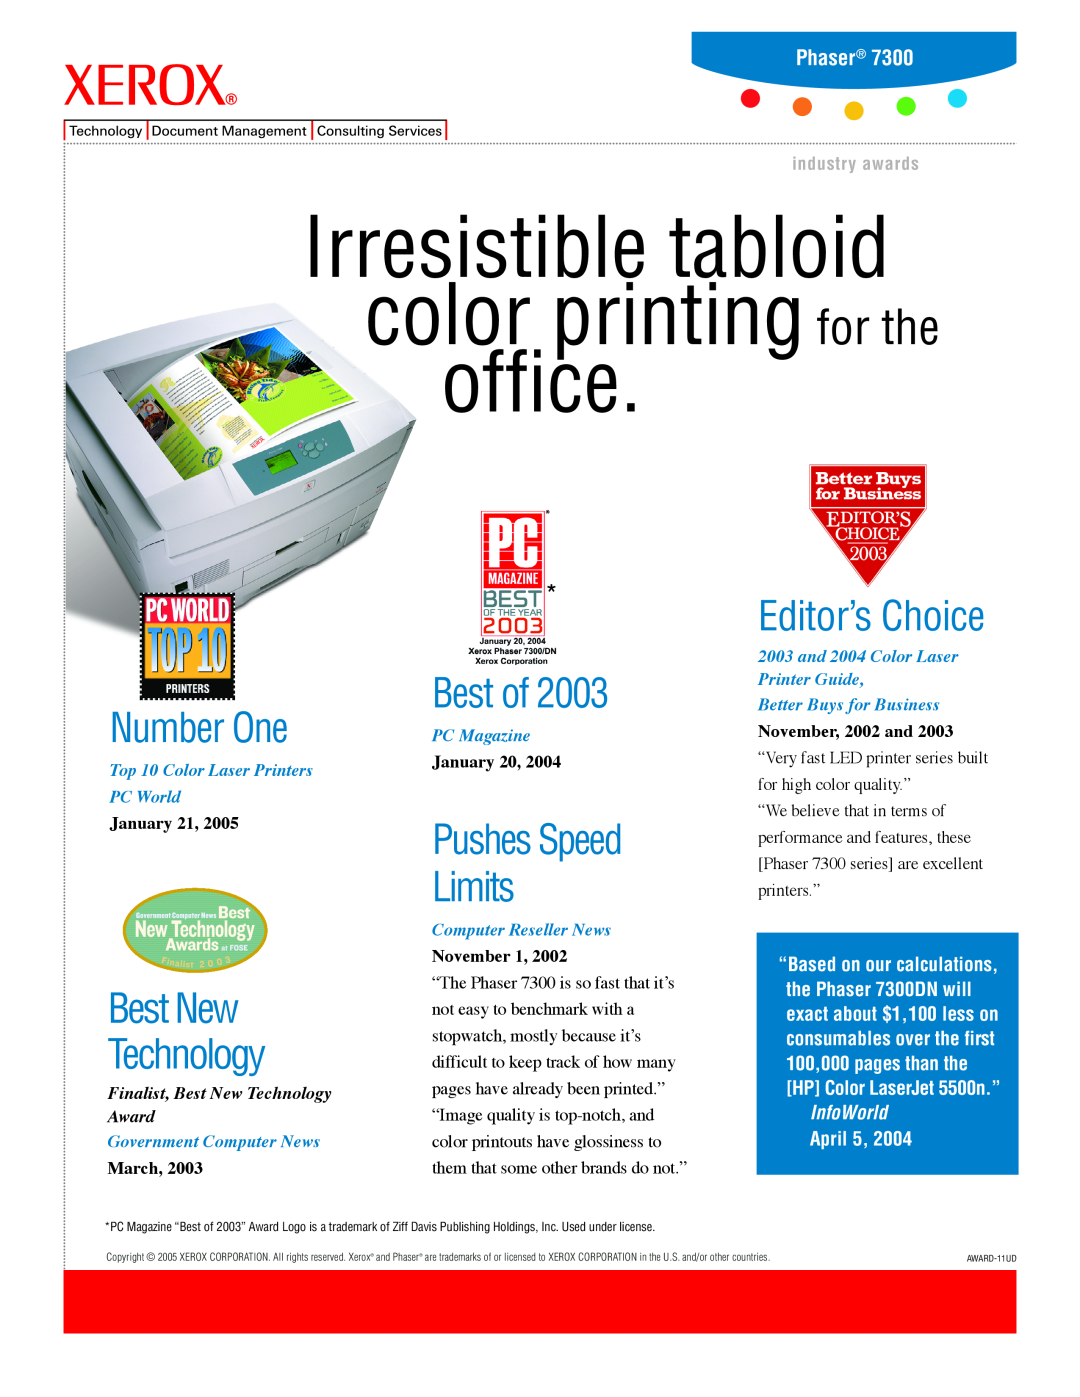 Xerox 7300DN manual office, Irresistible tabloid color printing for the, Number One, Best New Technology, Best of, Phaser 